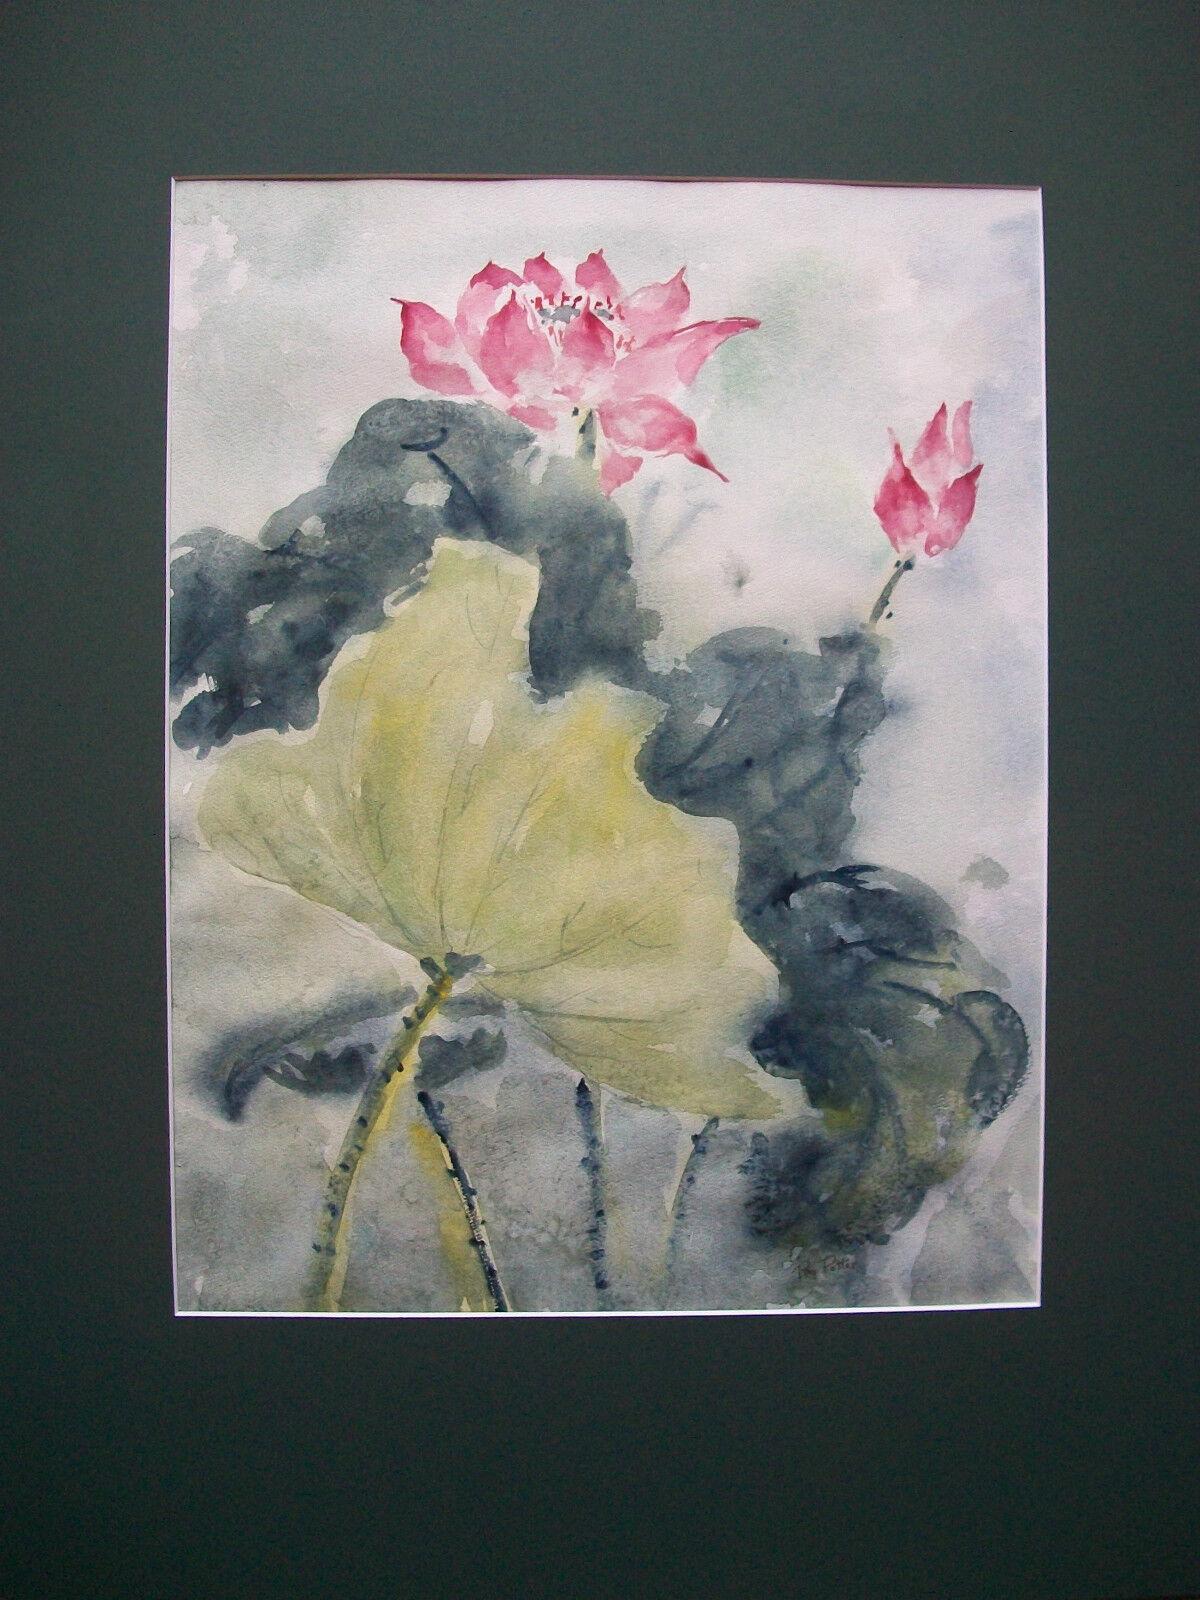 PEG POTTER - Vintage Impressionist style watercolor painting of water lilies - signed lower right - vintage matte - unframed - Canada - late 20th century.

Excellent vintage condition - no loss - no damage - no restoration - minor ripples in the